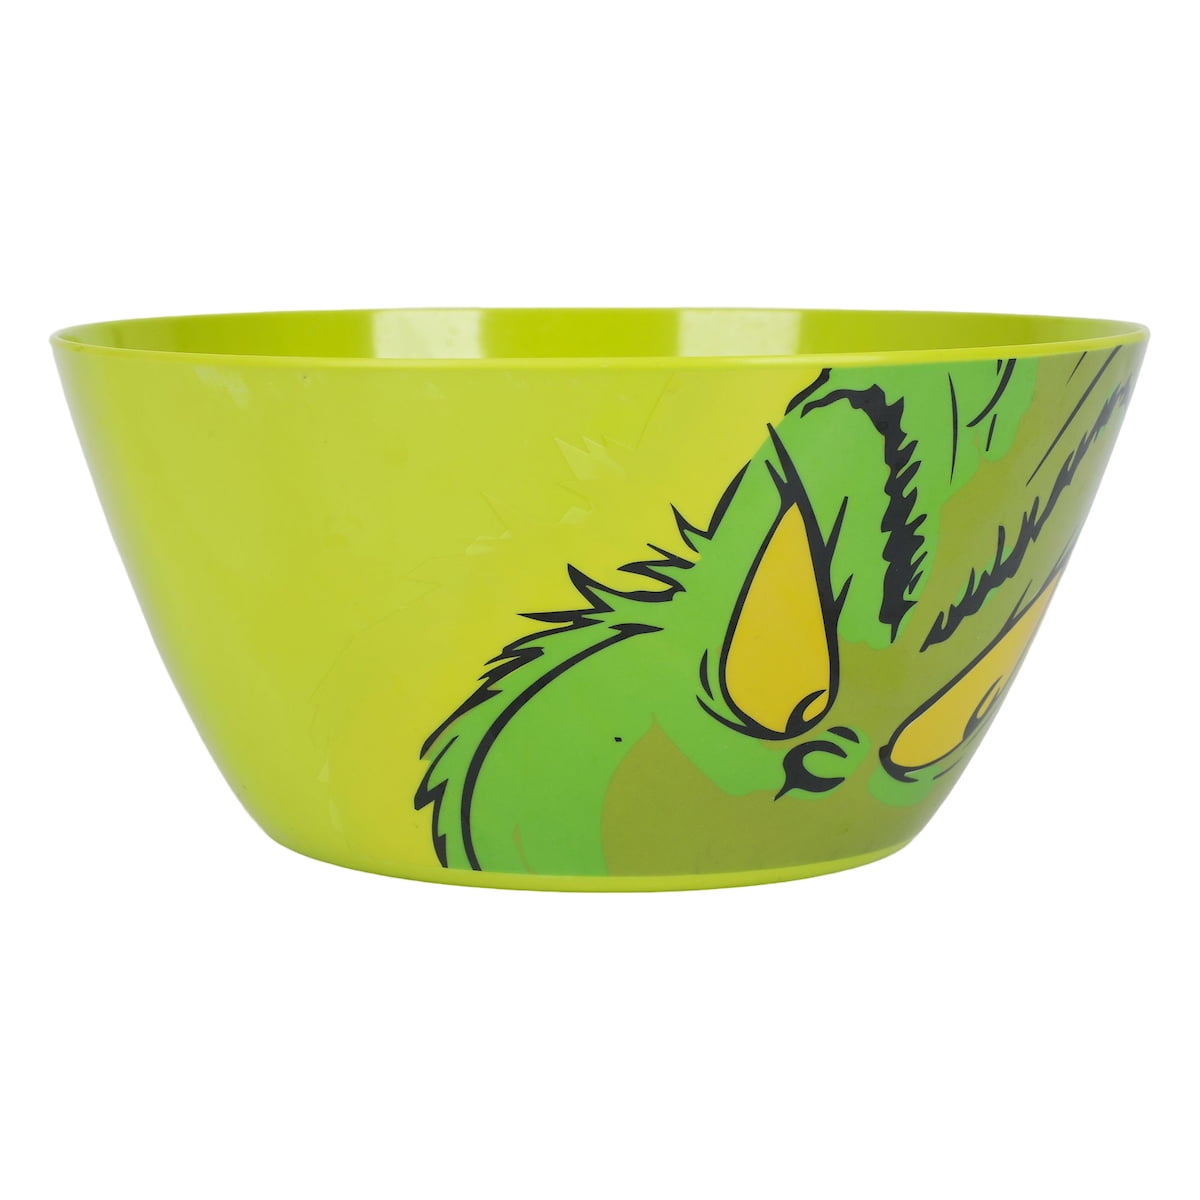 The Grinch White Serving Bowls